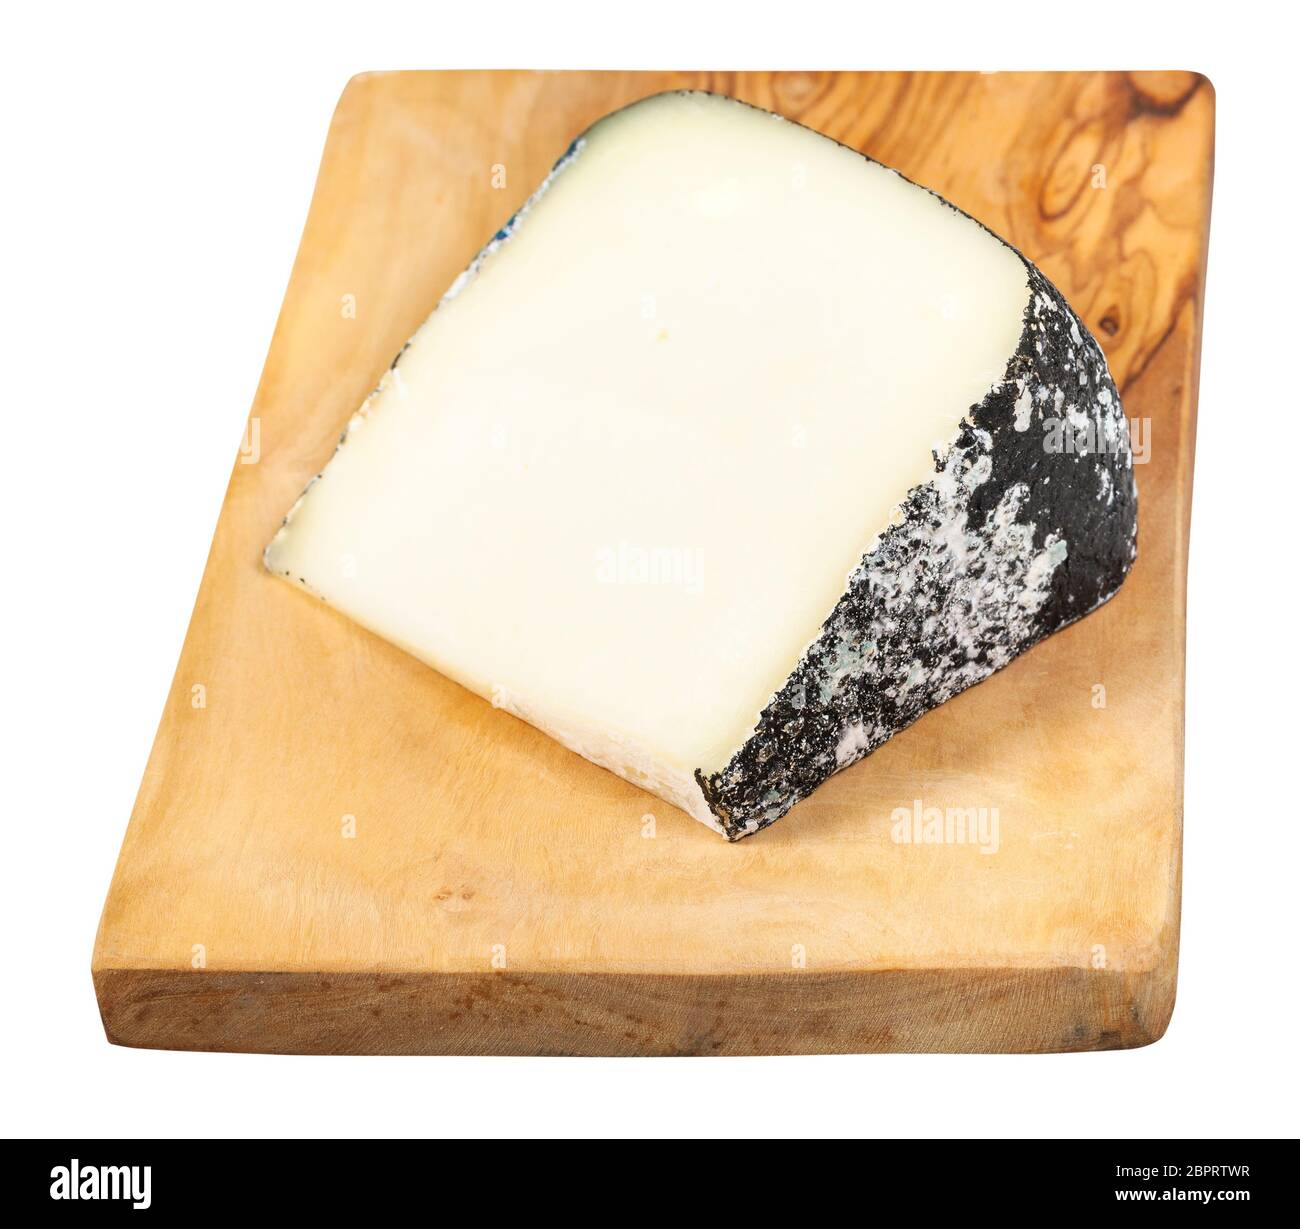 piece of local italian Perla Nera sheep's milk cheese on olive wood cutting board isolated on white background Stock Photo